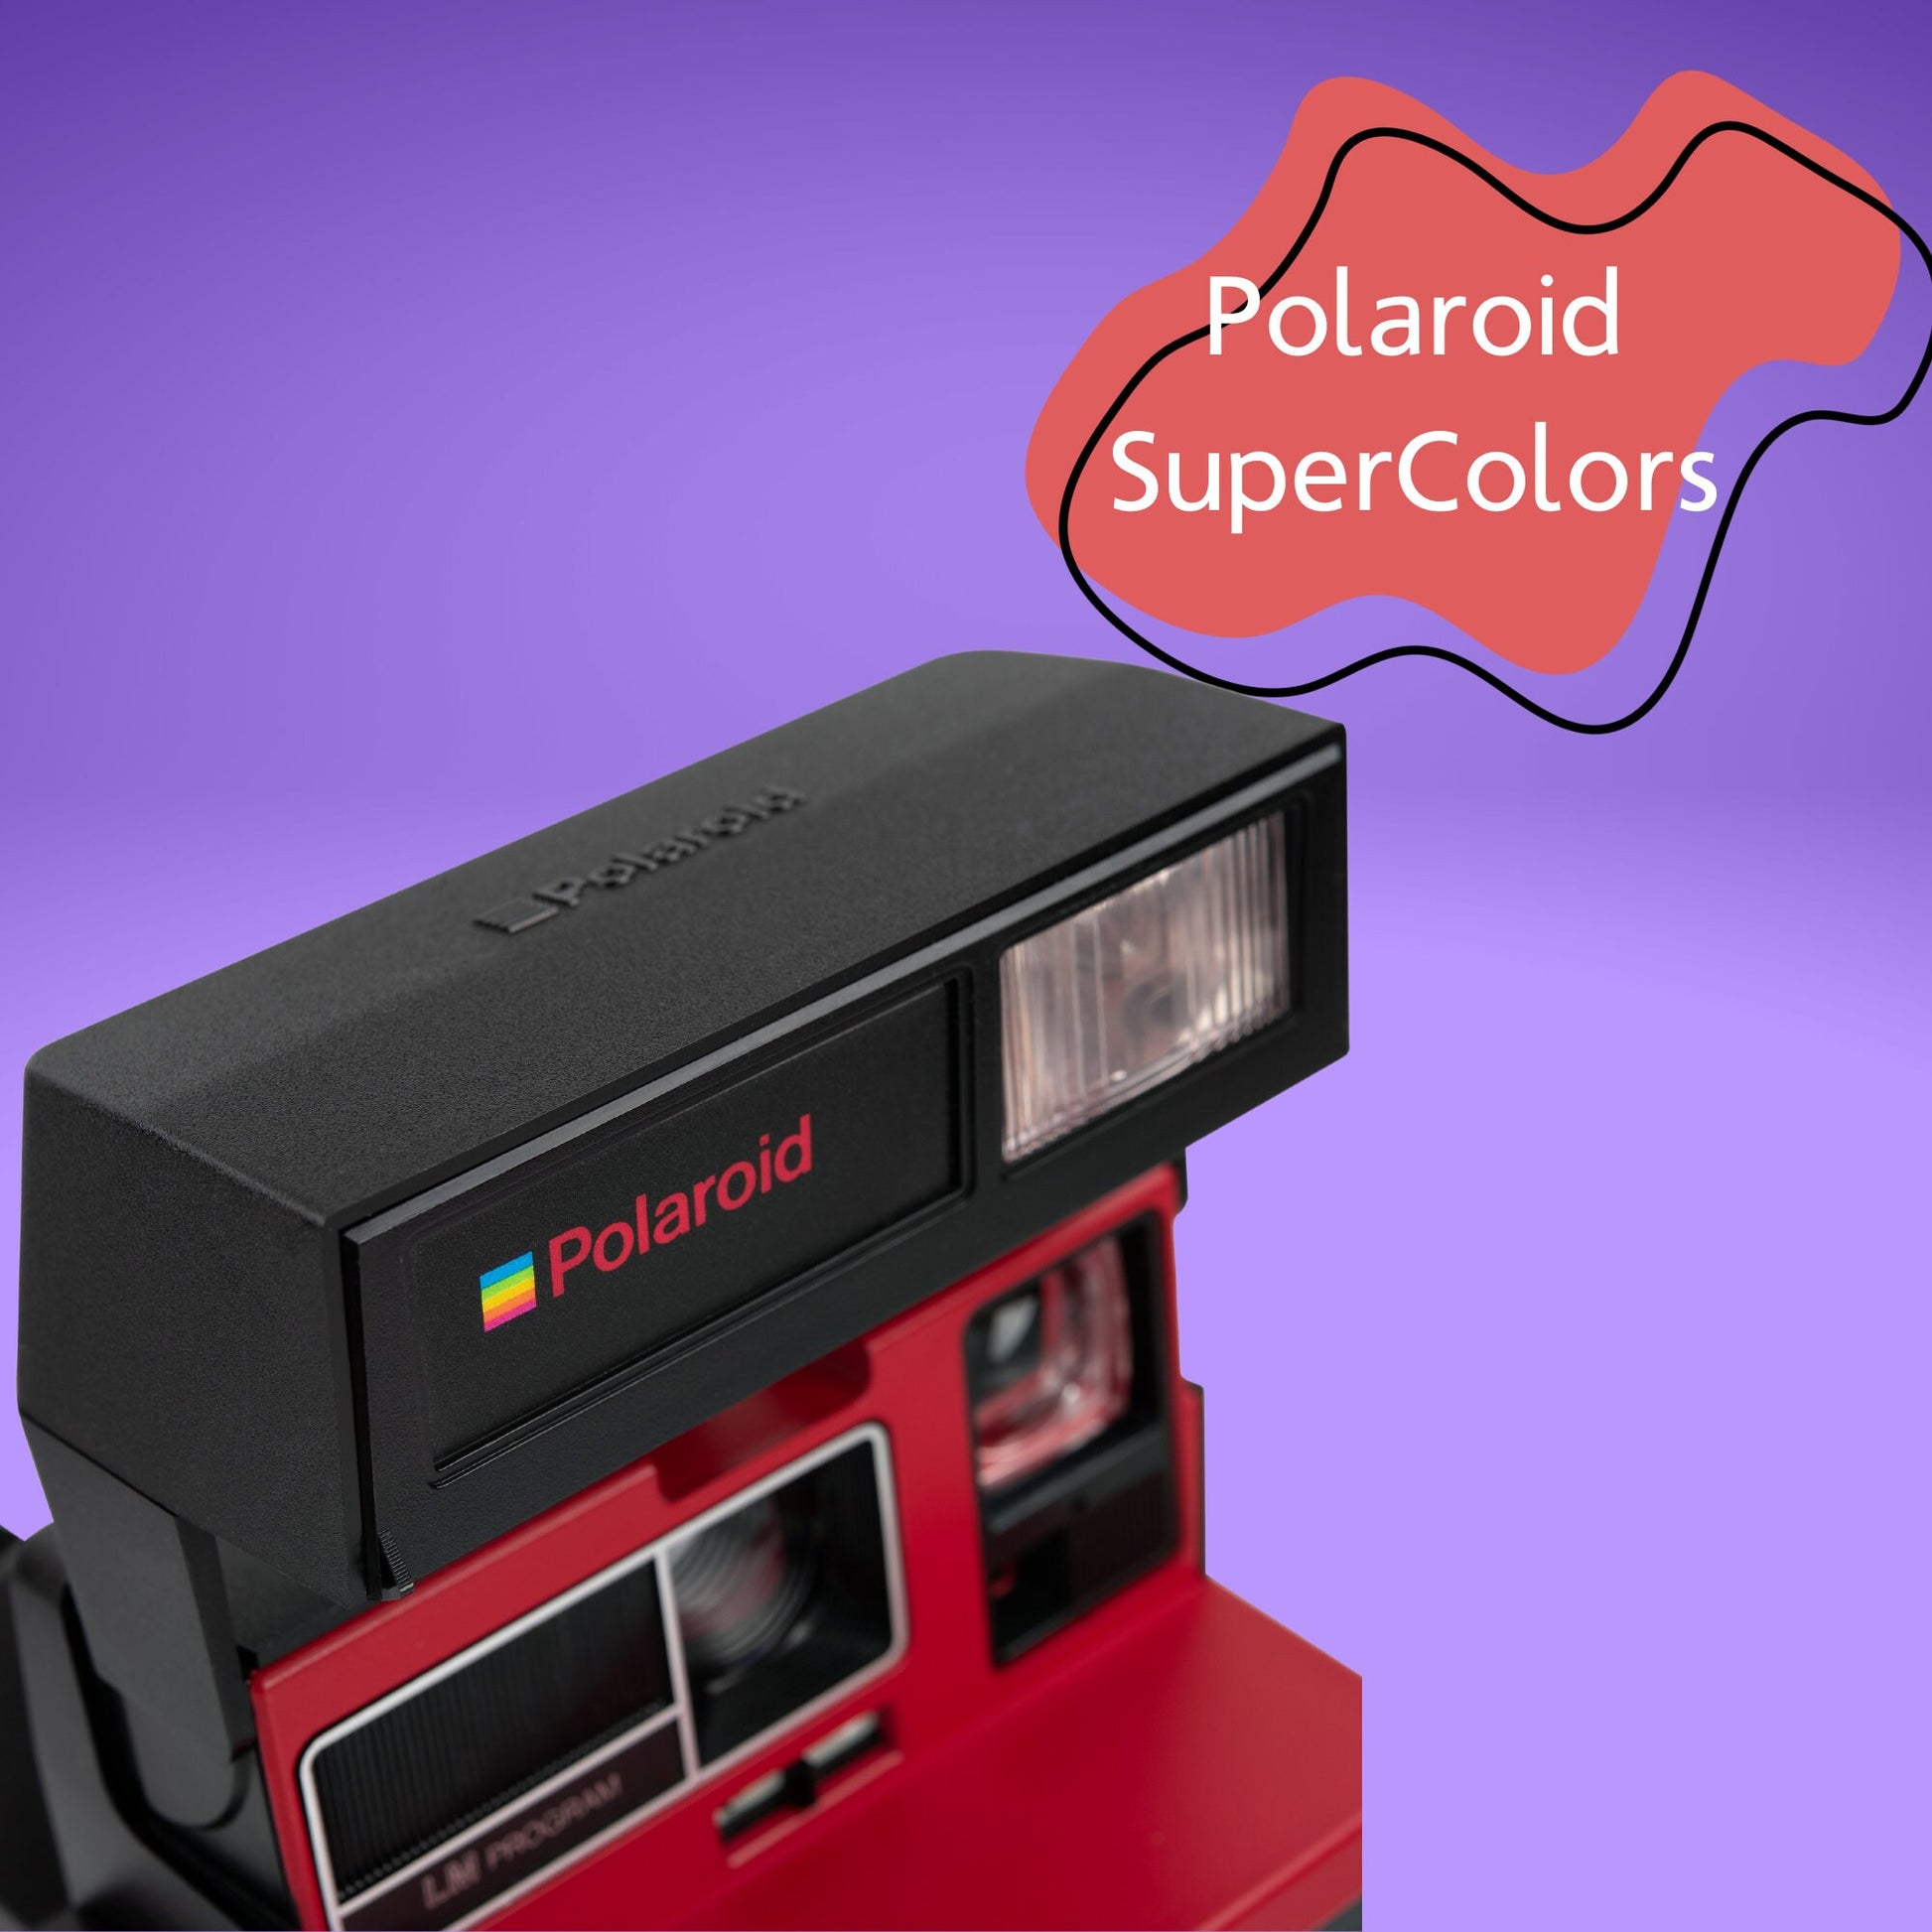 VIntage Polaroid Camera, Old Perfectly Working Instant Camera, Polaroid SuperColors Red - Vintage Polaroid Instant Cameras